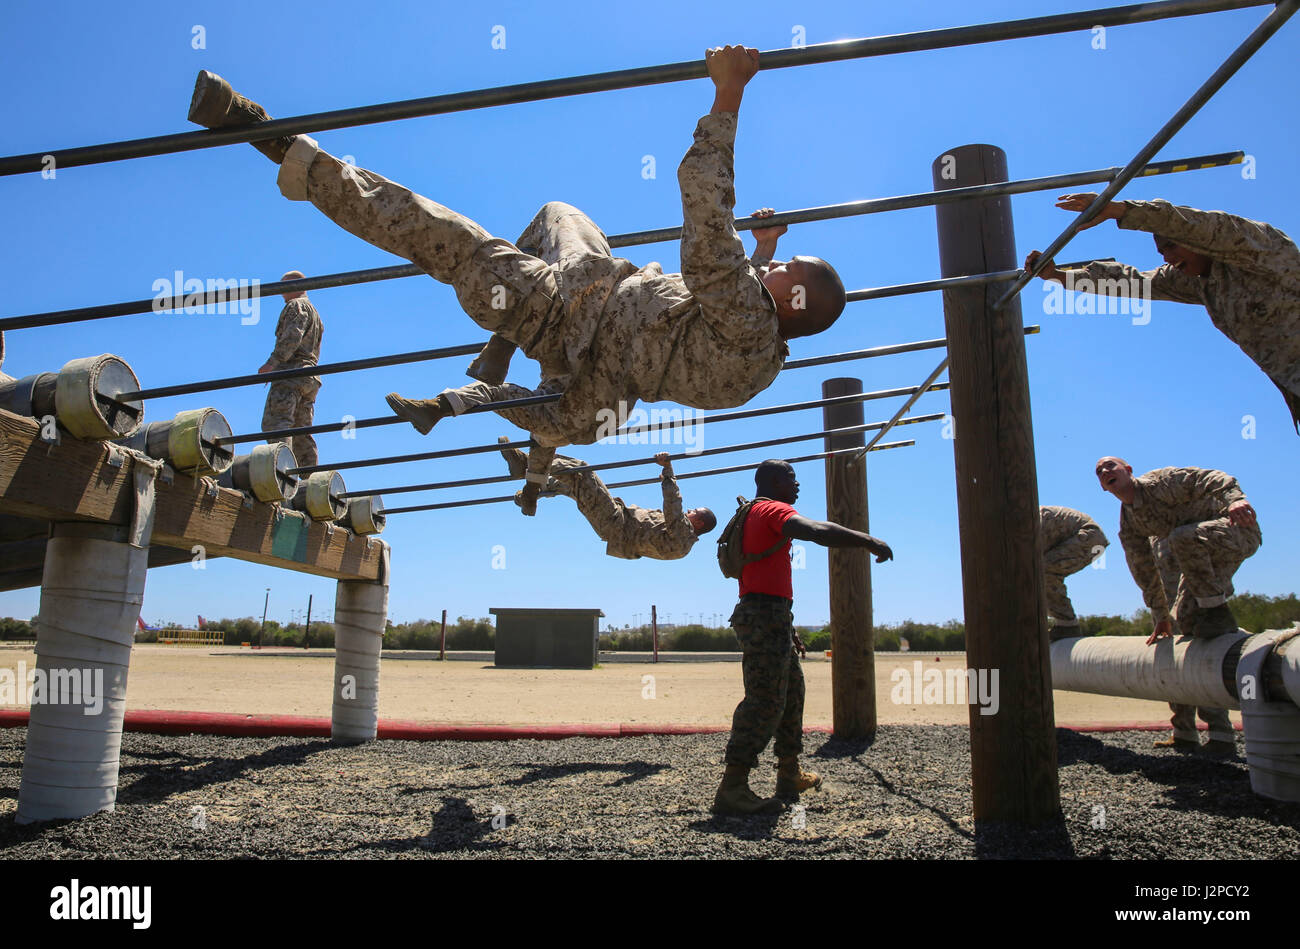 Recruits from Delta Company, 1st Recruit Training Battalion, maneuver a high obstacle during Obstacle Course II at Marine Corps Recruit Depot San Diego, April 20. The recruits were allowed to complete the obstacle by sliding down under a single bar or by pulling themselves up and sliding down two bars. Annually, more than 17,000 males recruited from the Western Recruiting Region are trained at MCRD San Diego. Delta Company is scheduled to graduate June 30. Stock Photo